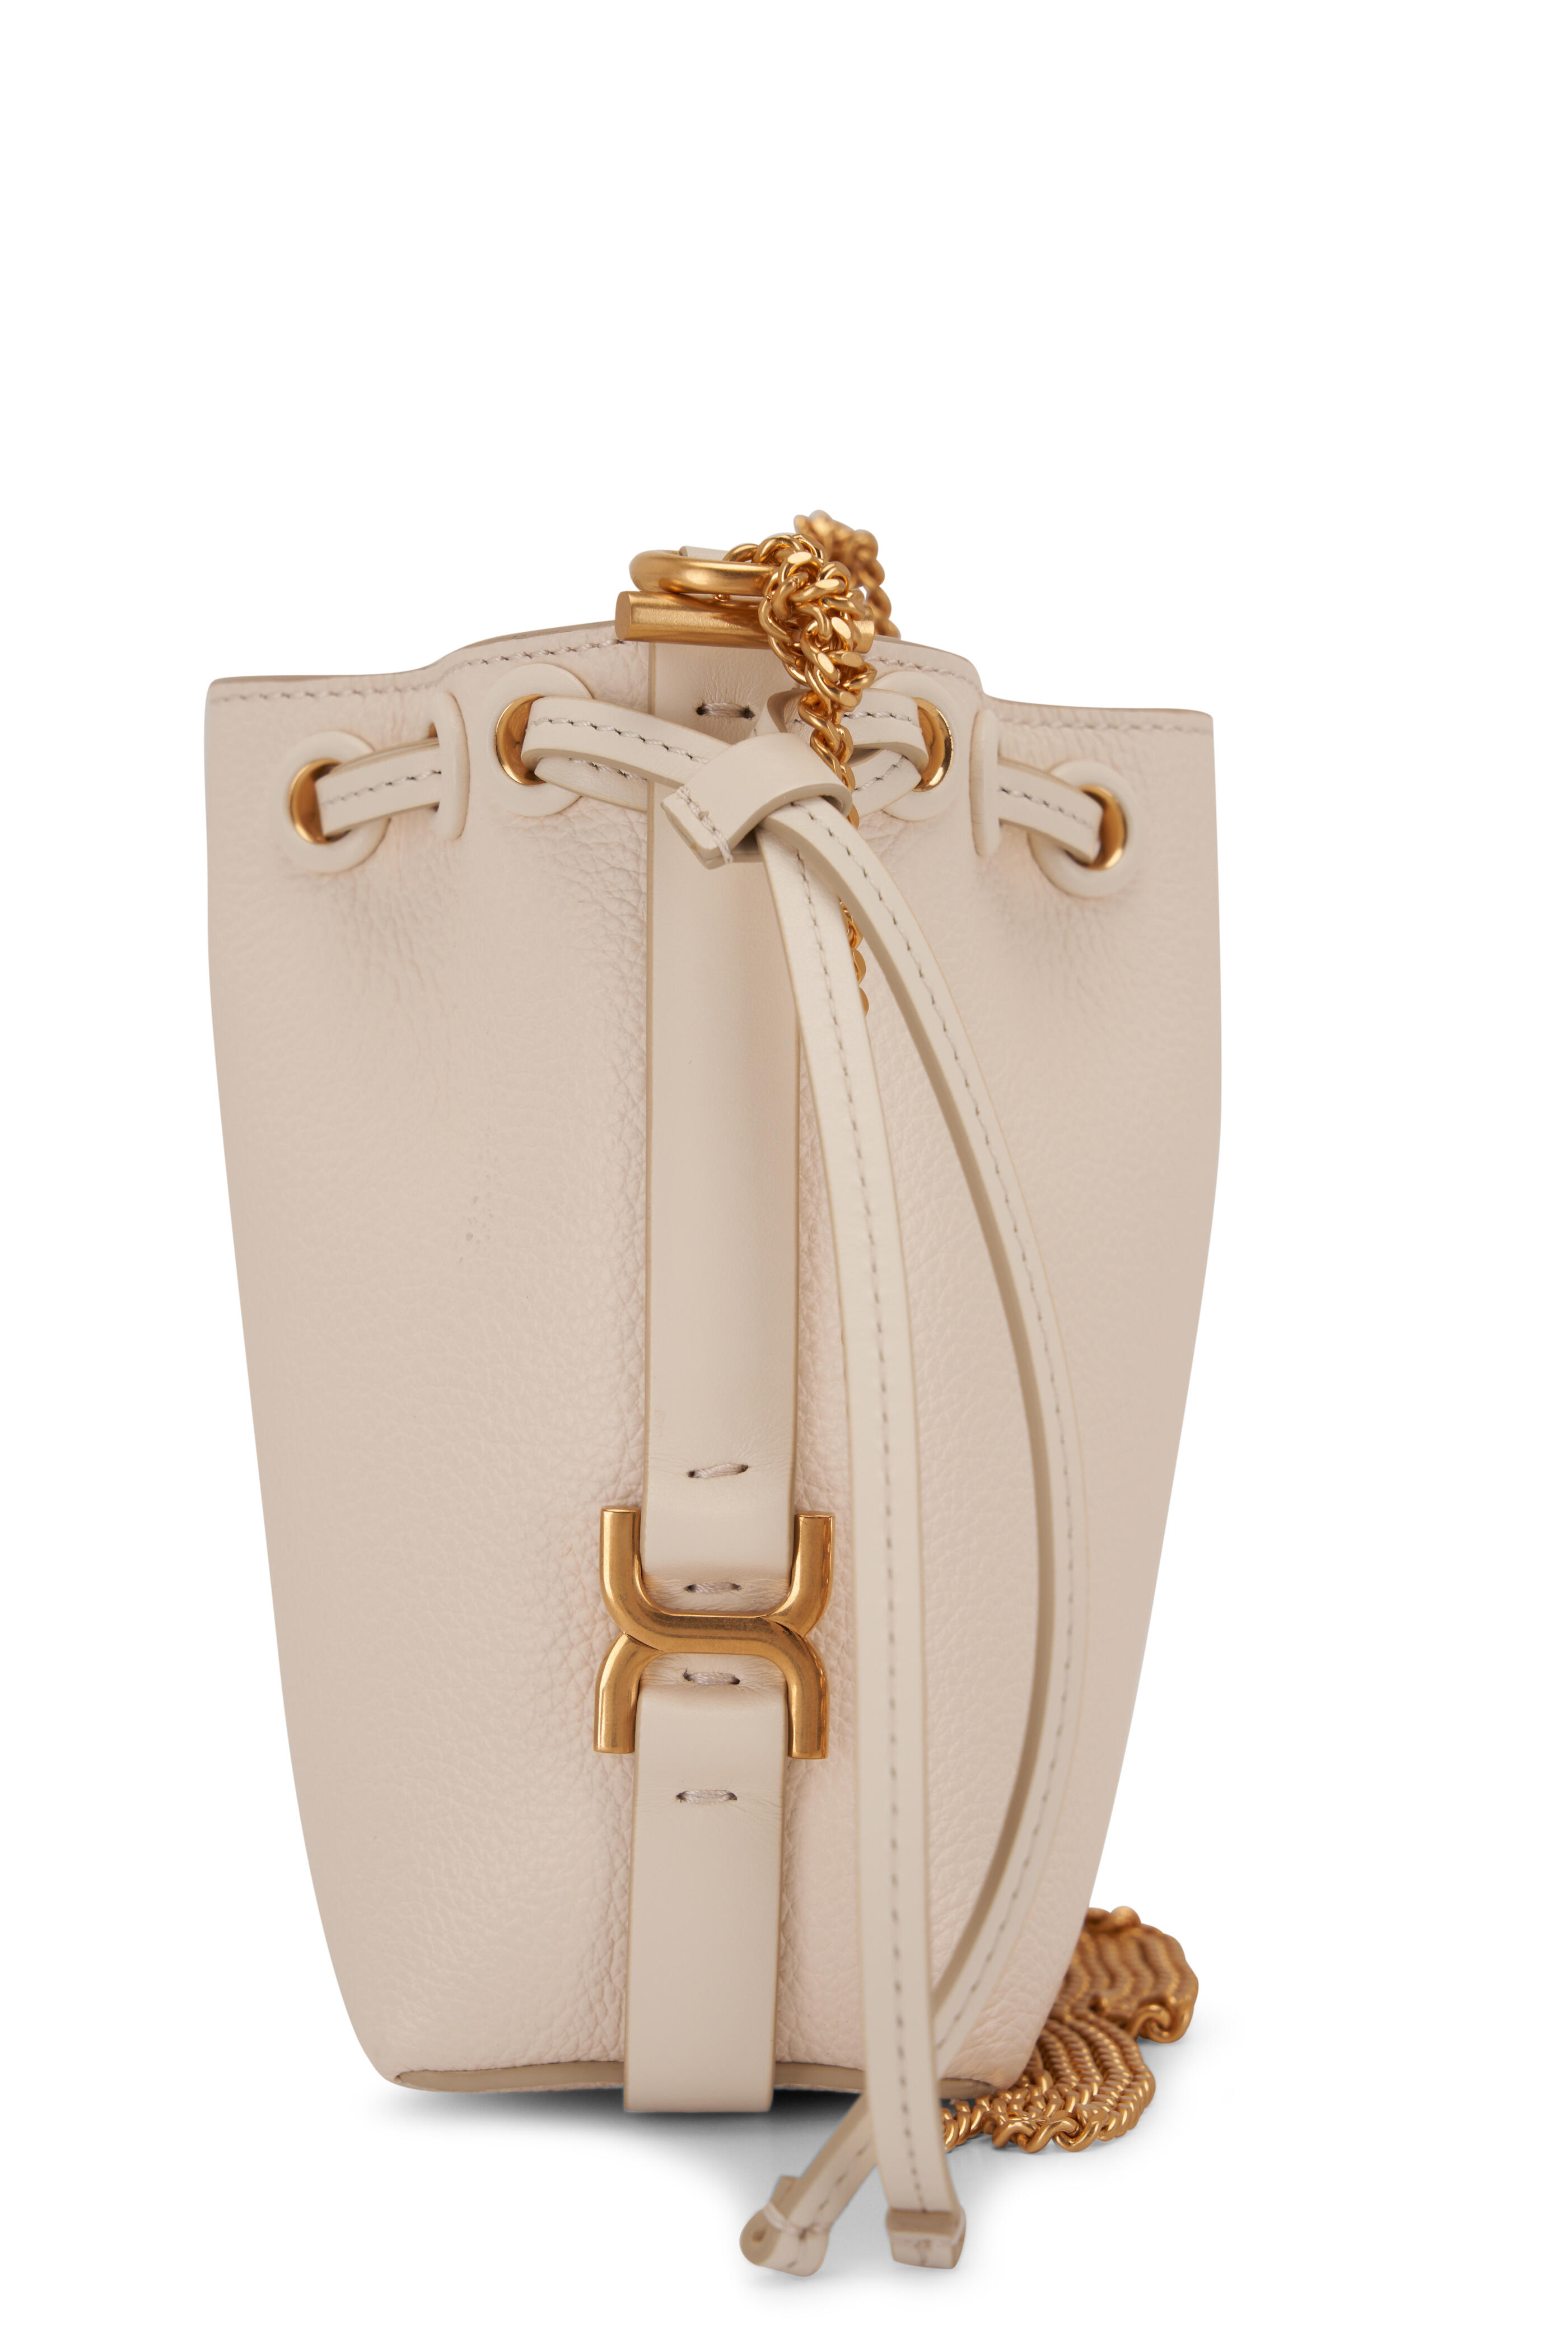 Small Woven Bucket Bag  Natural – Milly & Grace